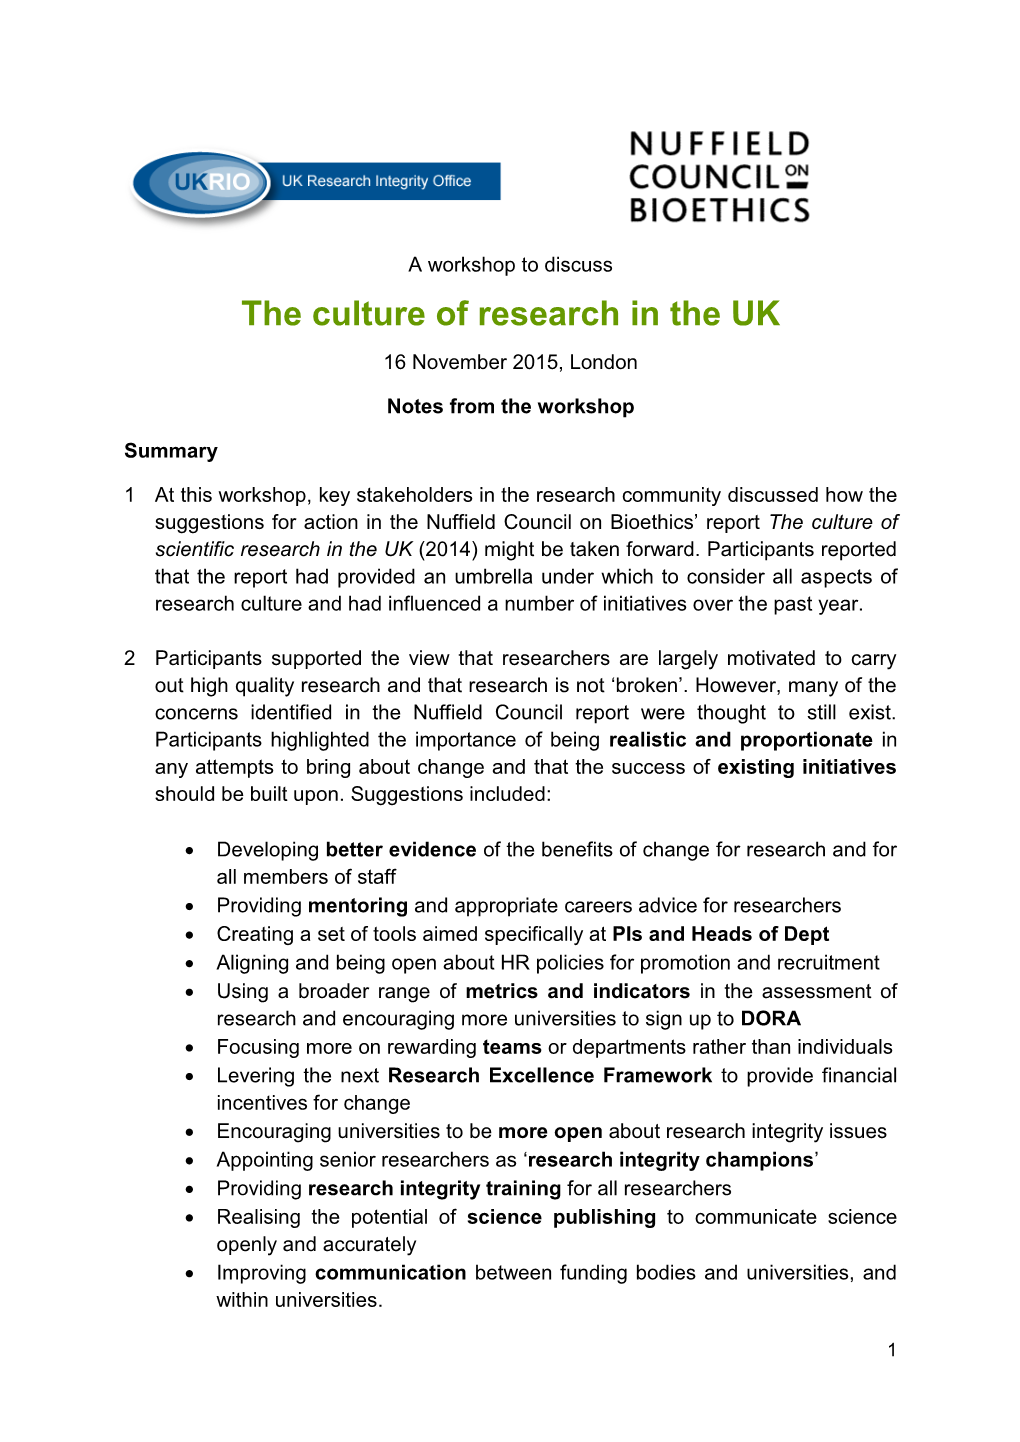 The Culture of Research in the UK 16 November 2015, London